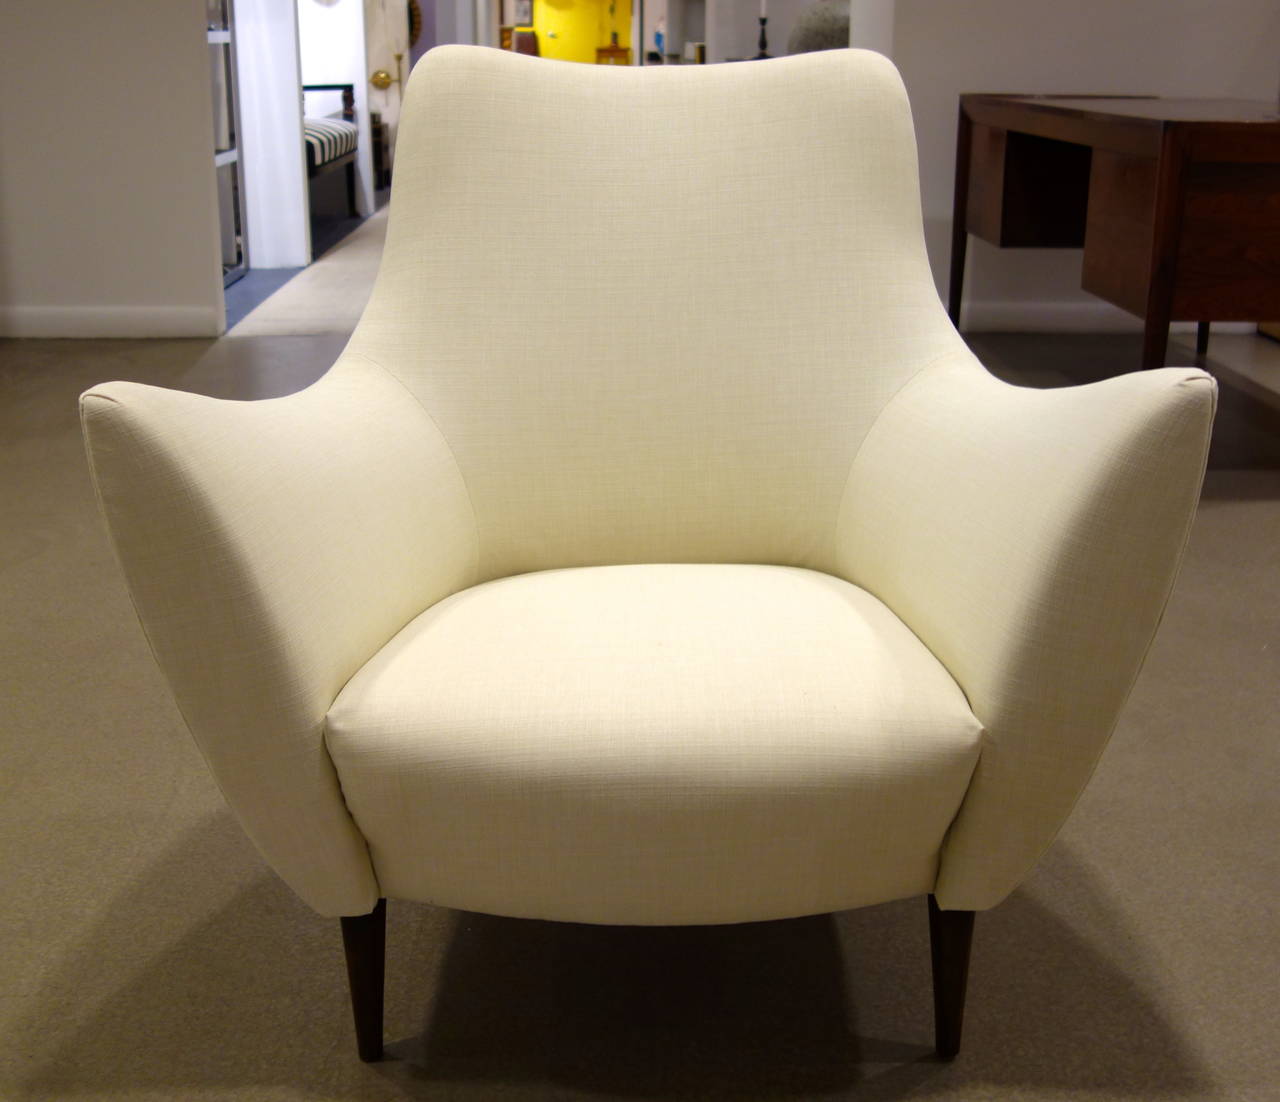 A pair of Mid-Century Style sculptural Italian lounge chairs with shaped, flared arms with tight backs and seats resting on tapered, conical wood feet newly upholstered in off-white textured fabric.  Dimensions are listed below and the arm height is